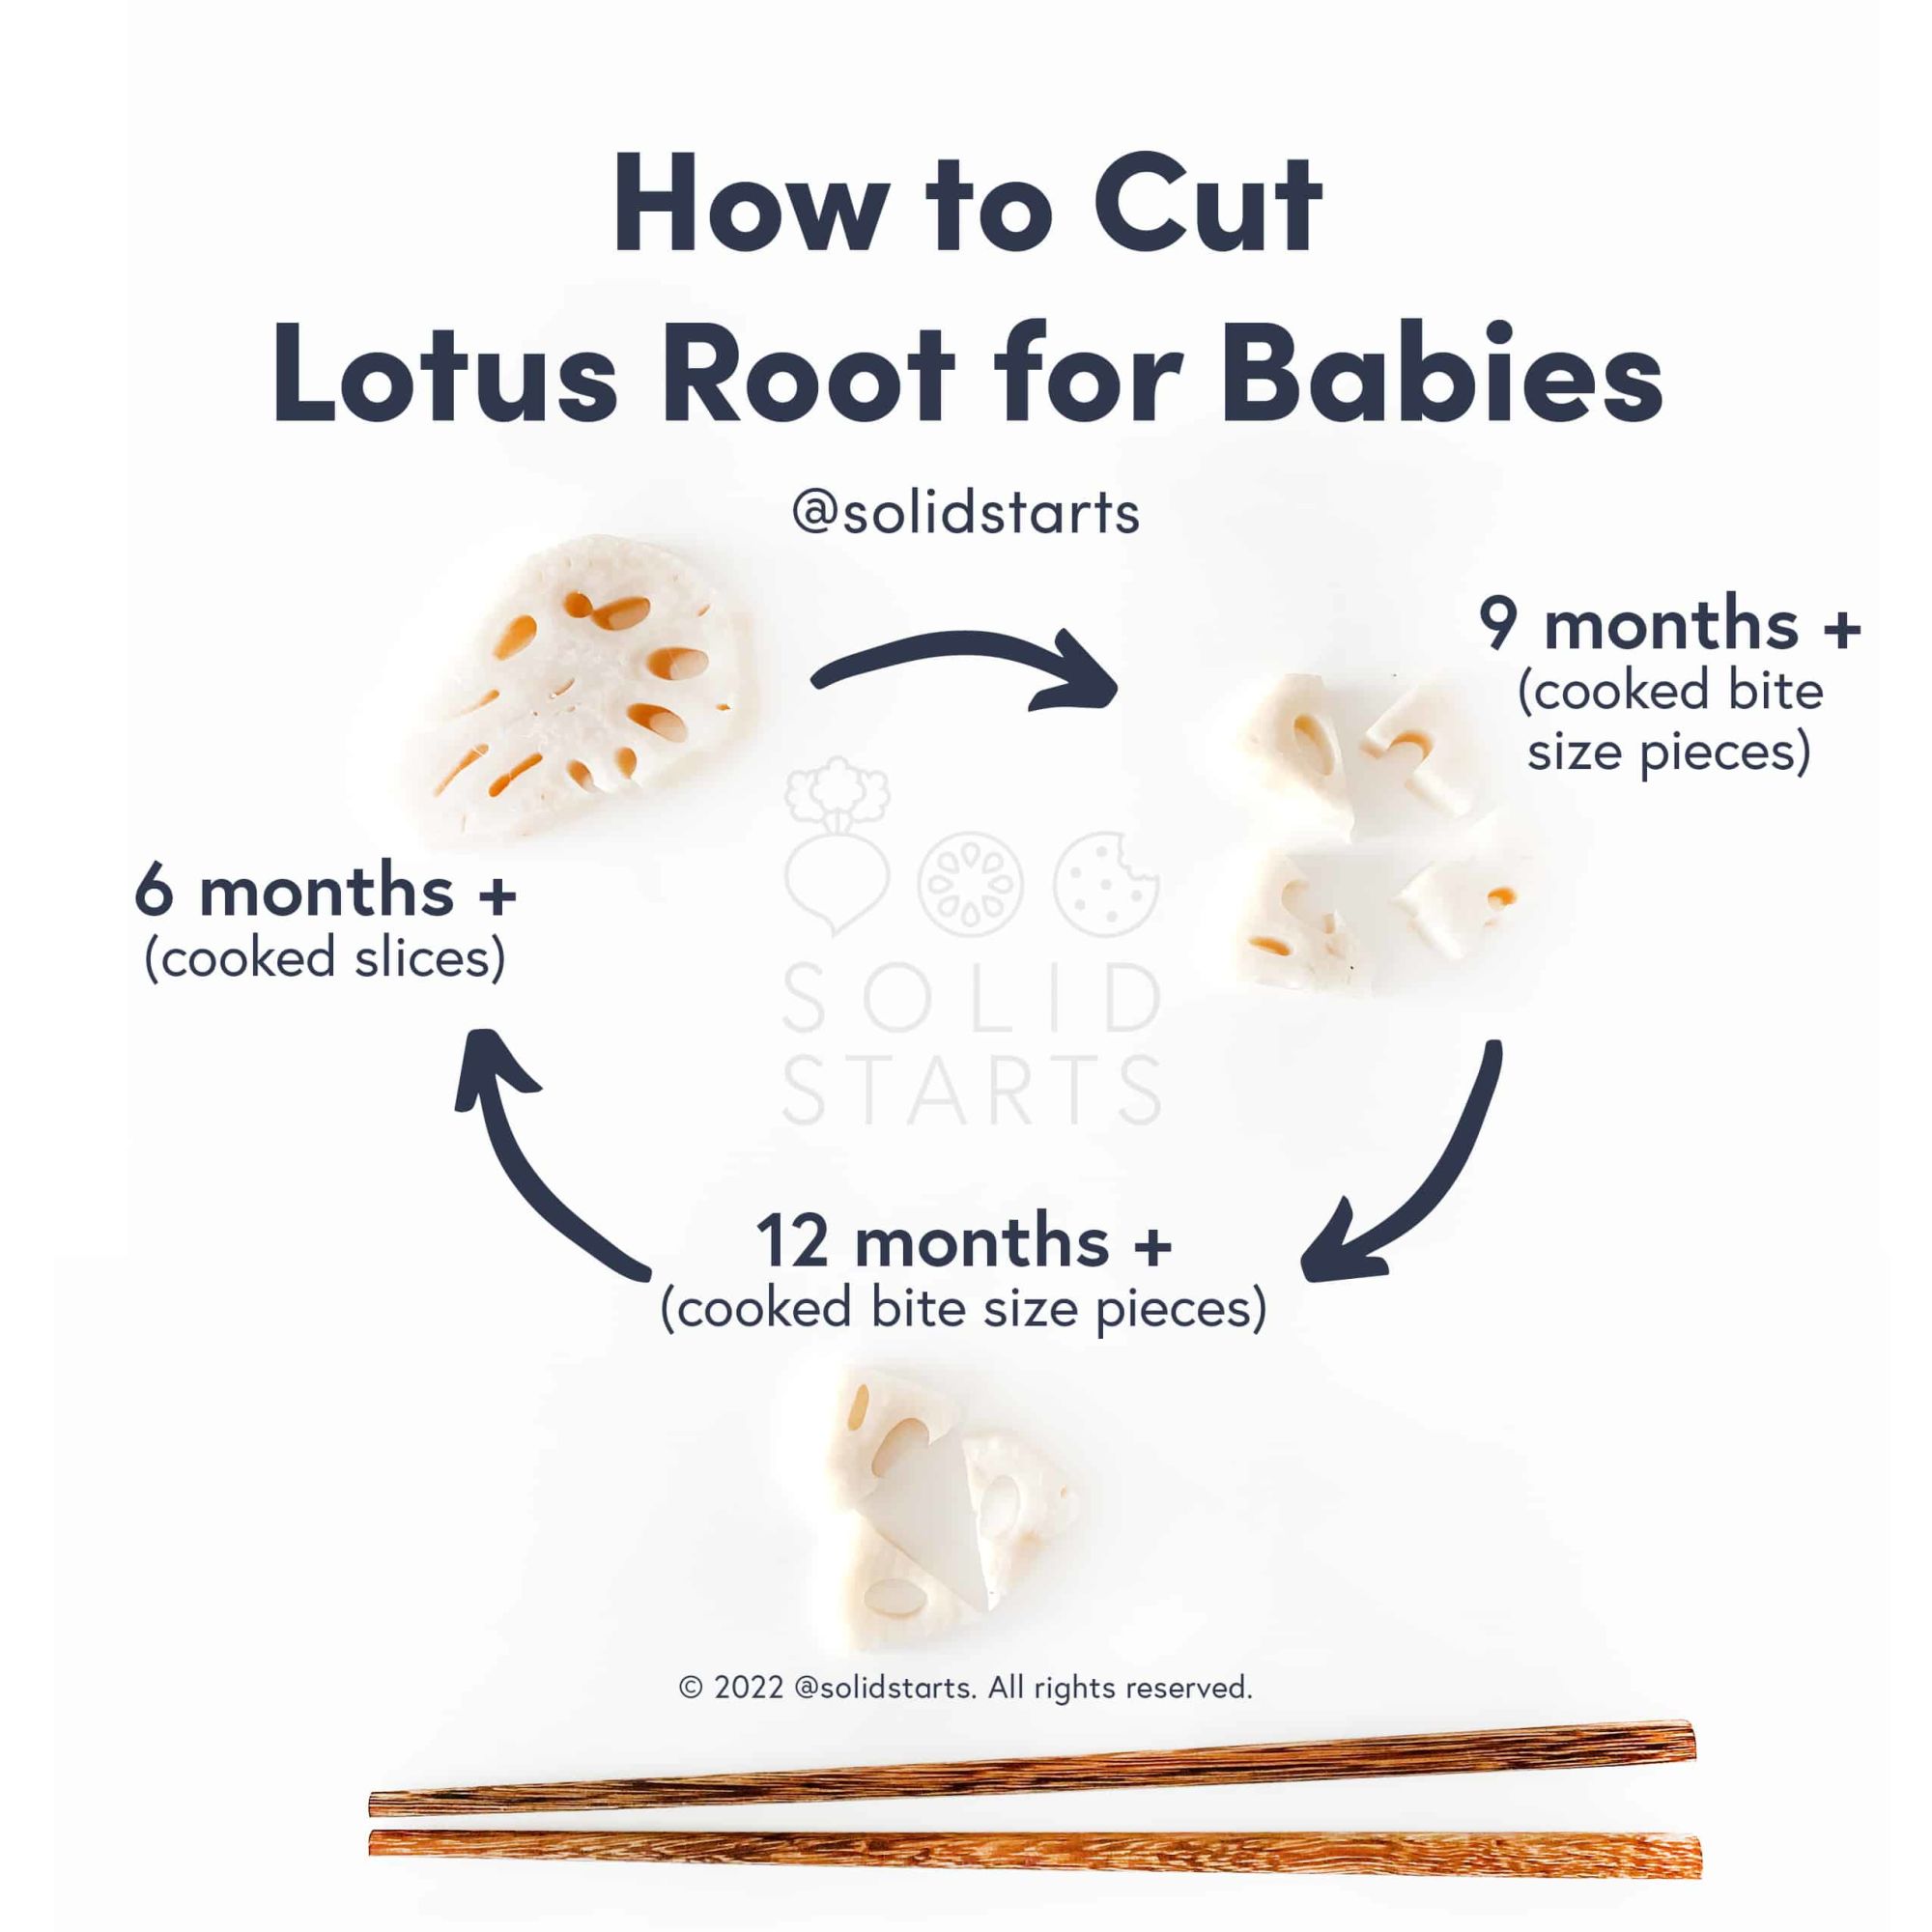 How to Cut Lotus Root for Babies